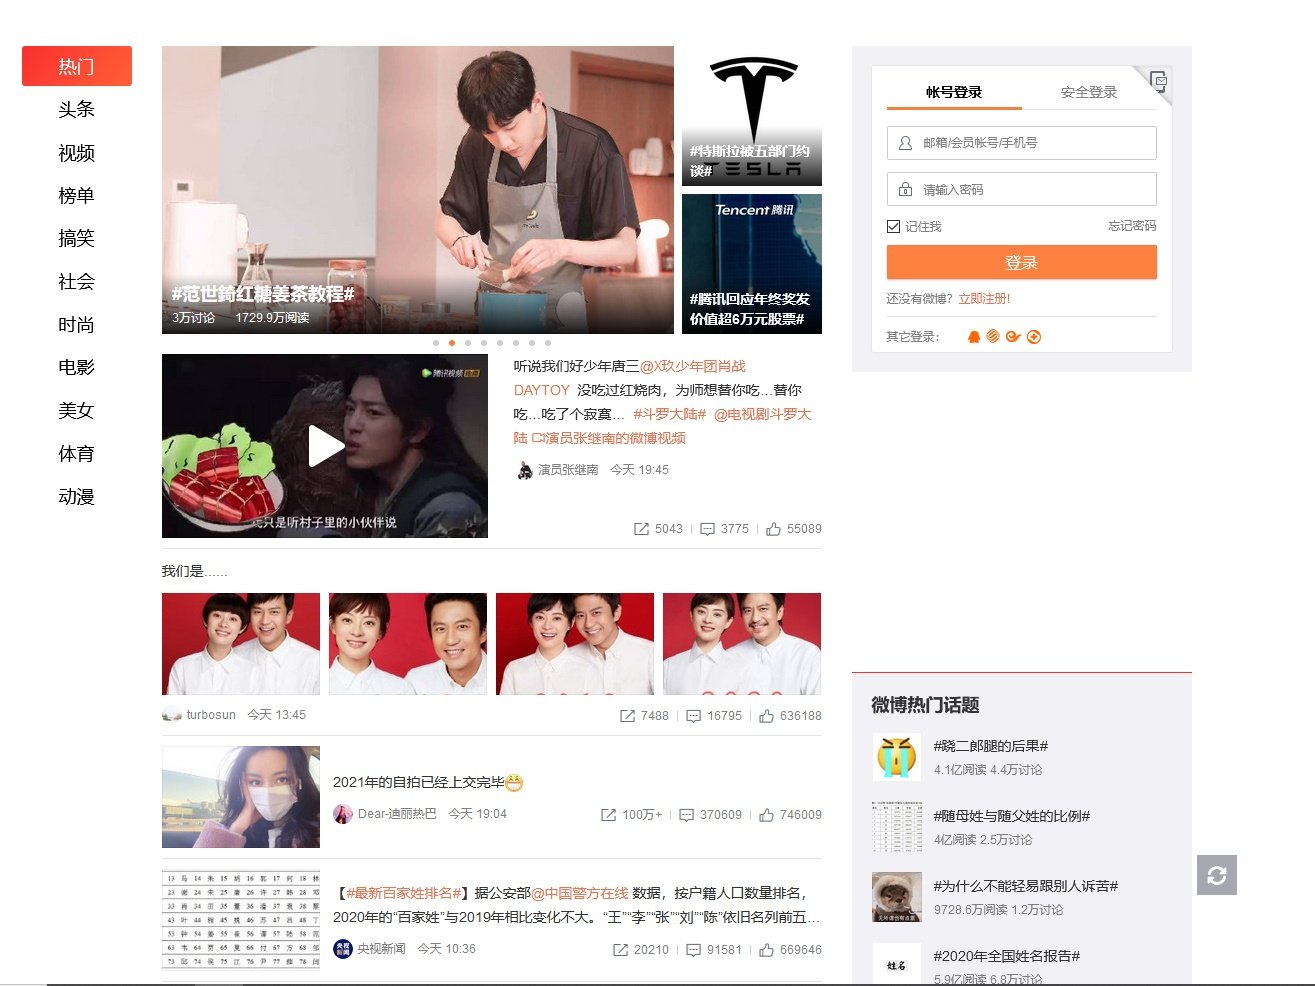 Rede social chinesa Weibo